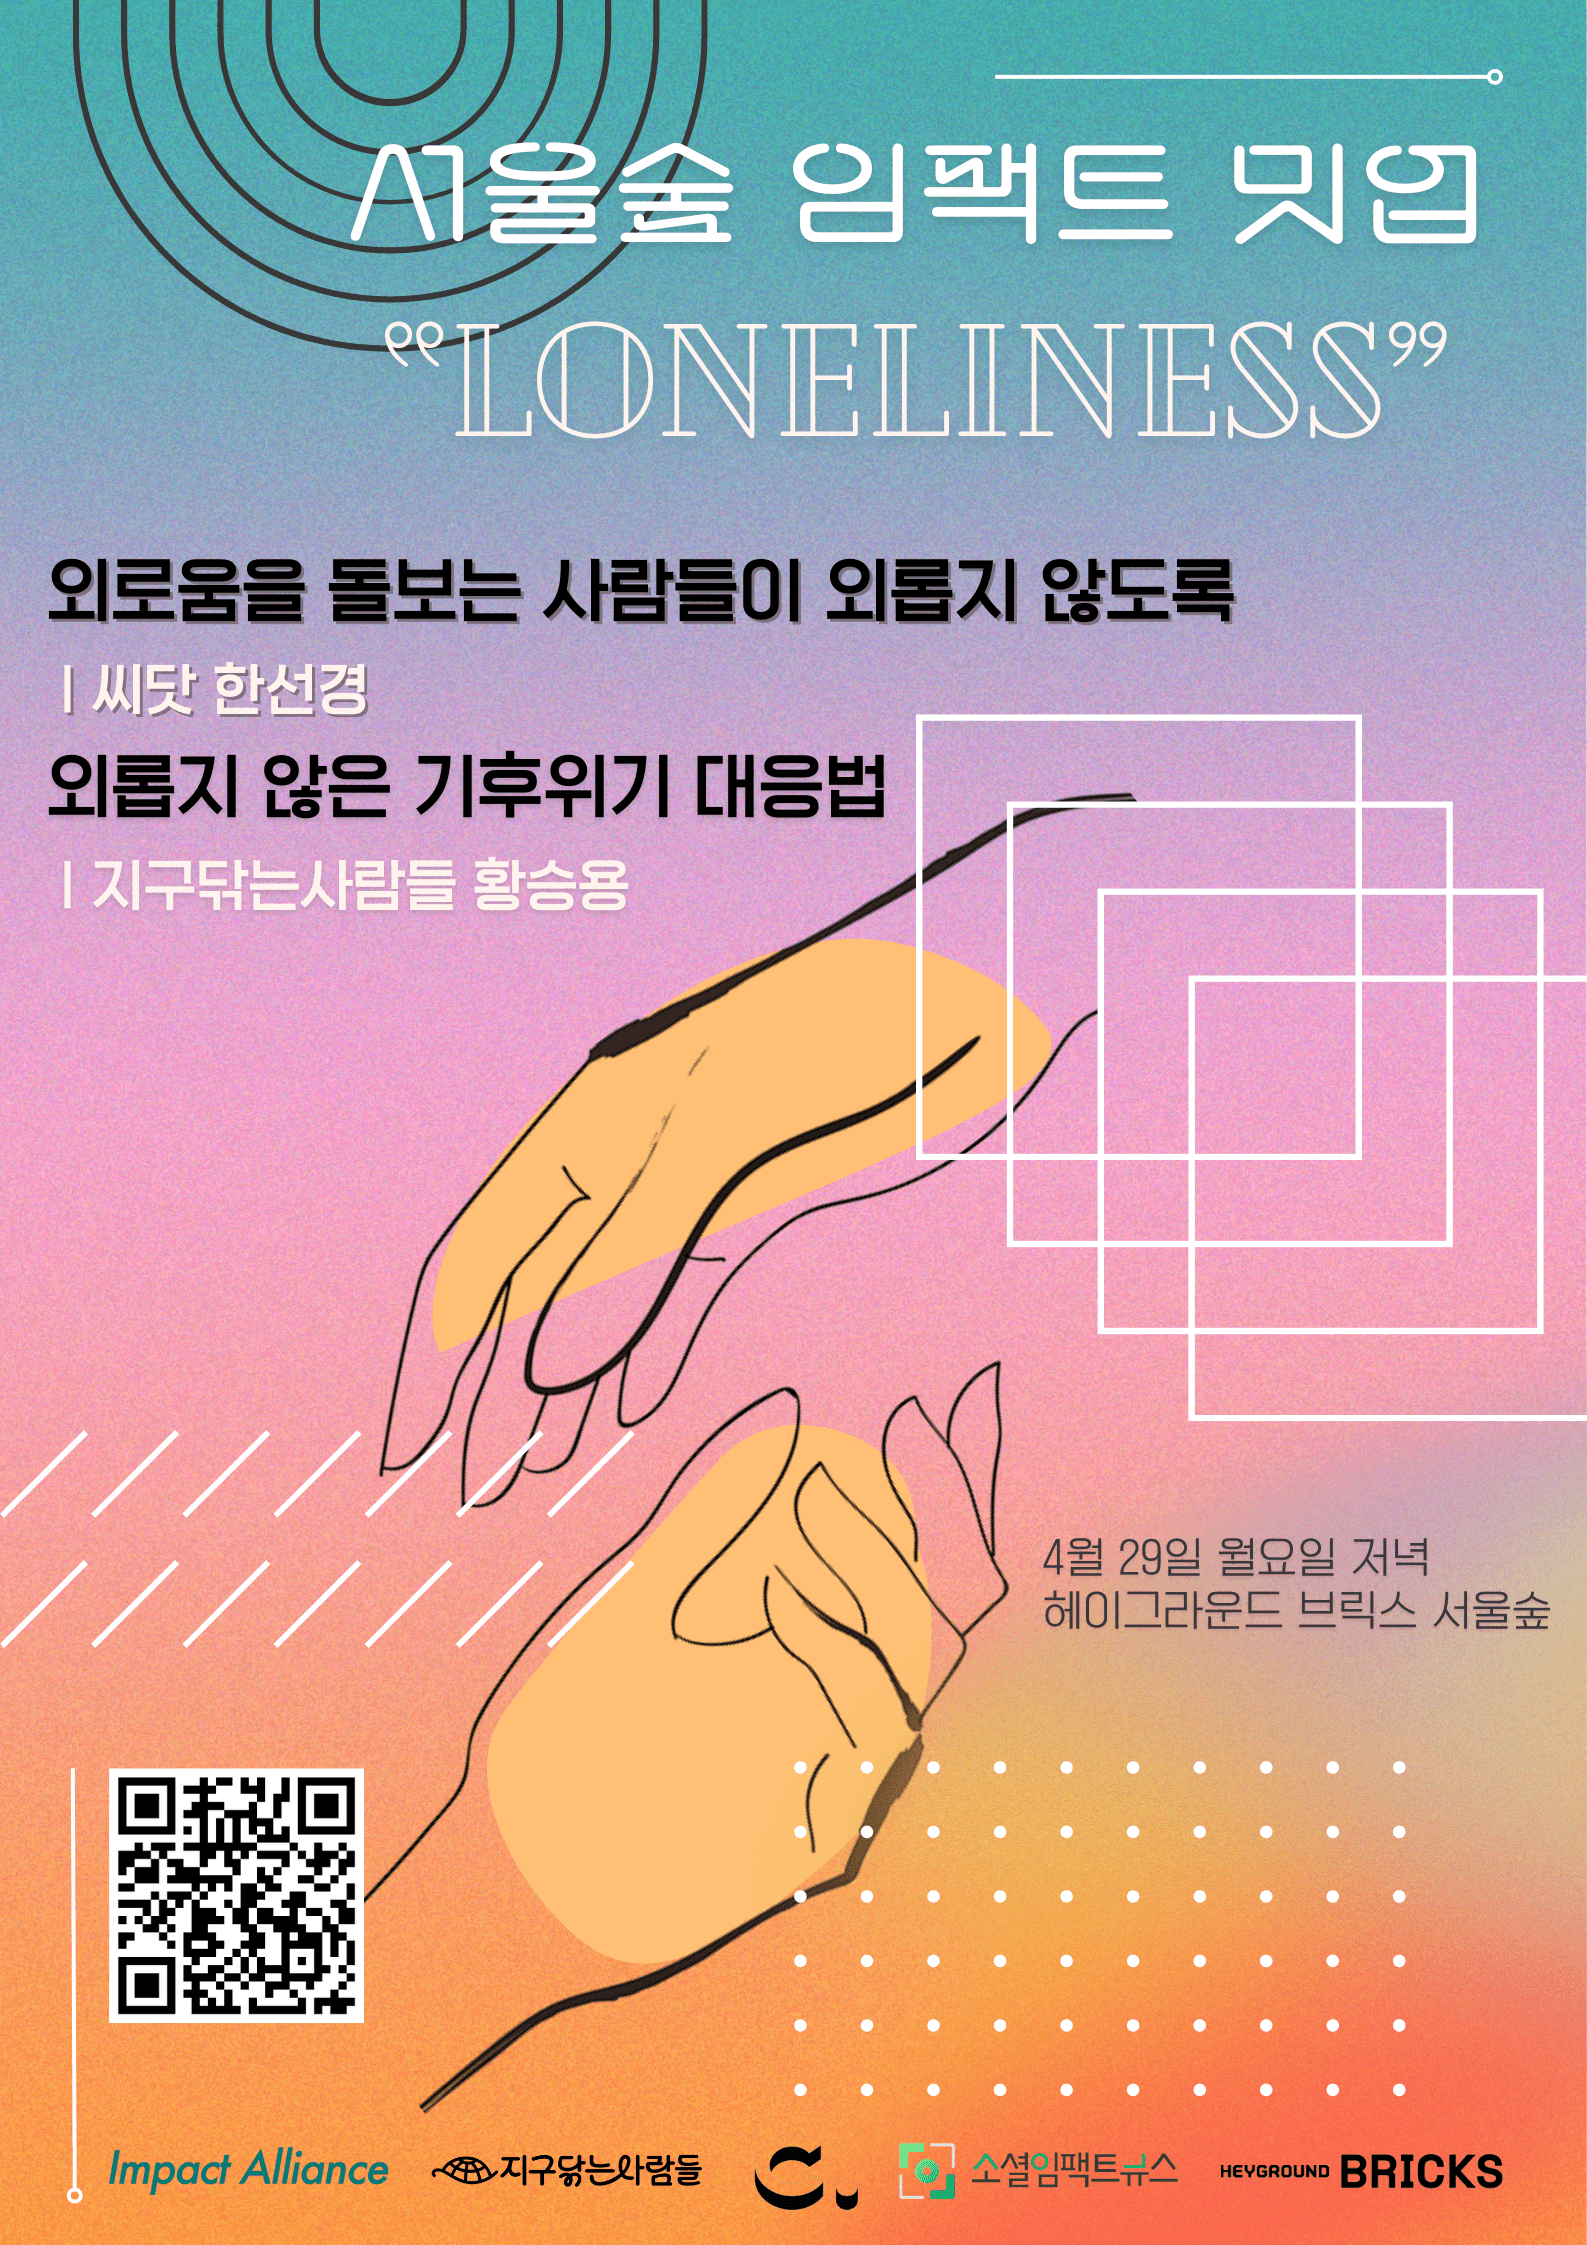 https://storage.tally.so/9f143a8d-000a-4f98-9d16-d5f1ecc2275c/poster-loneliness.png